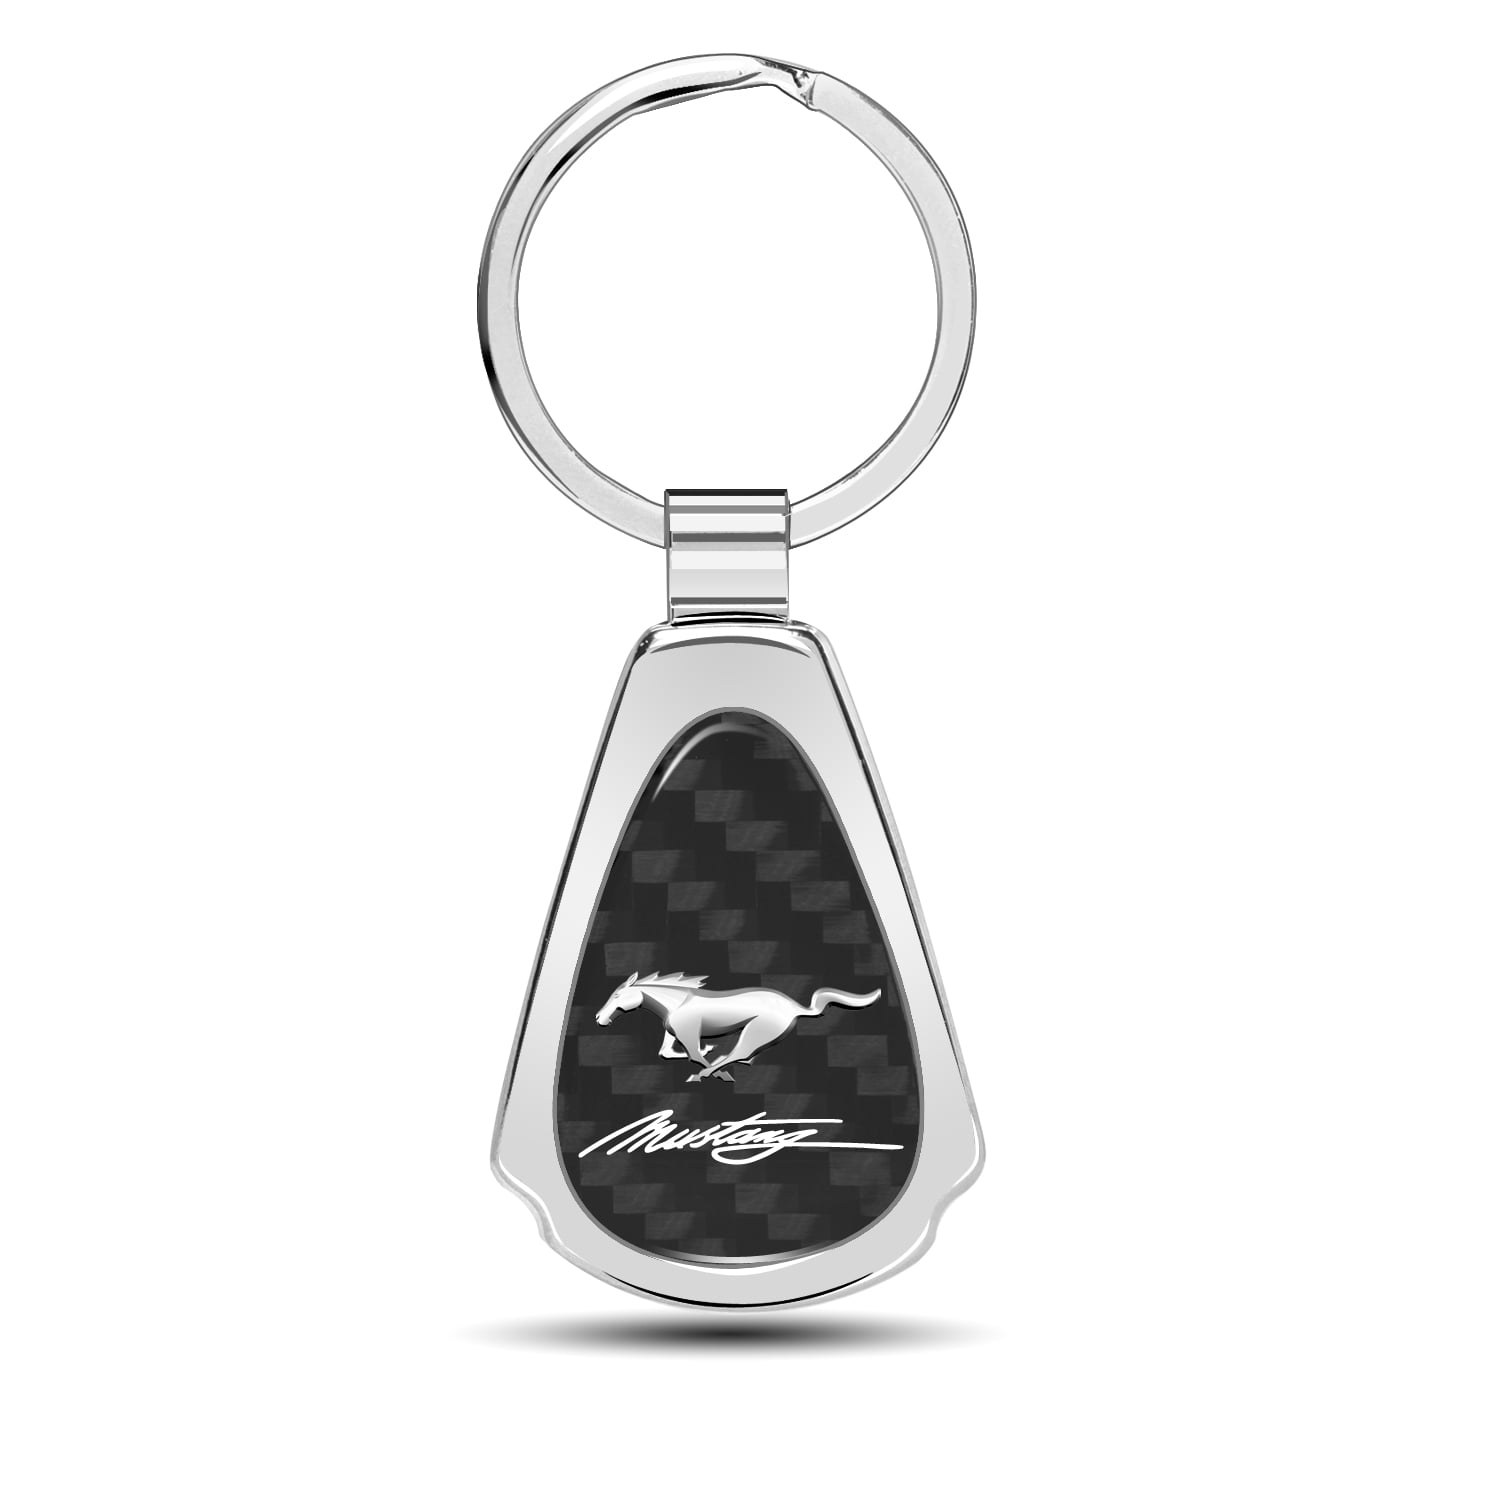 Authentic For Ford Mustang Logo Metal Chrome Black Tear Drop Key Chain Ring Fob 